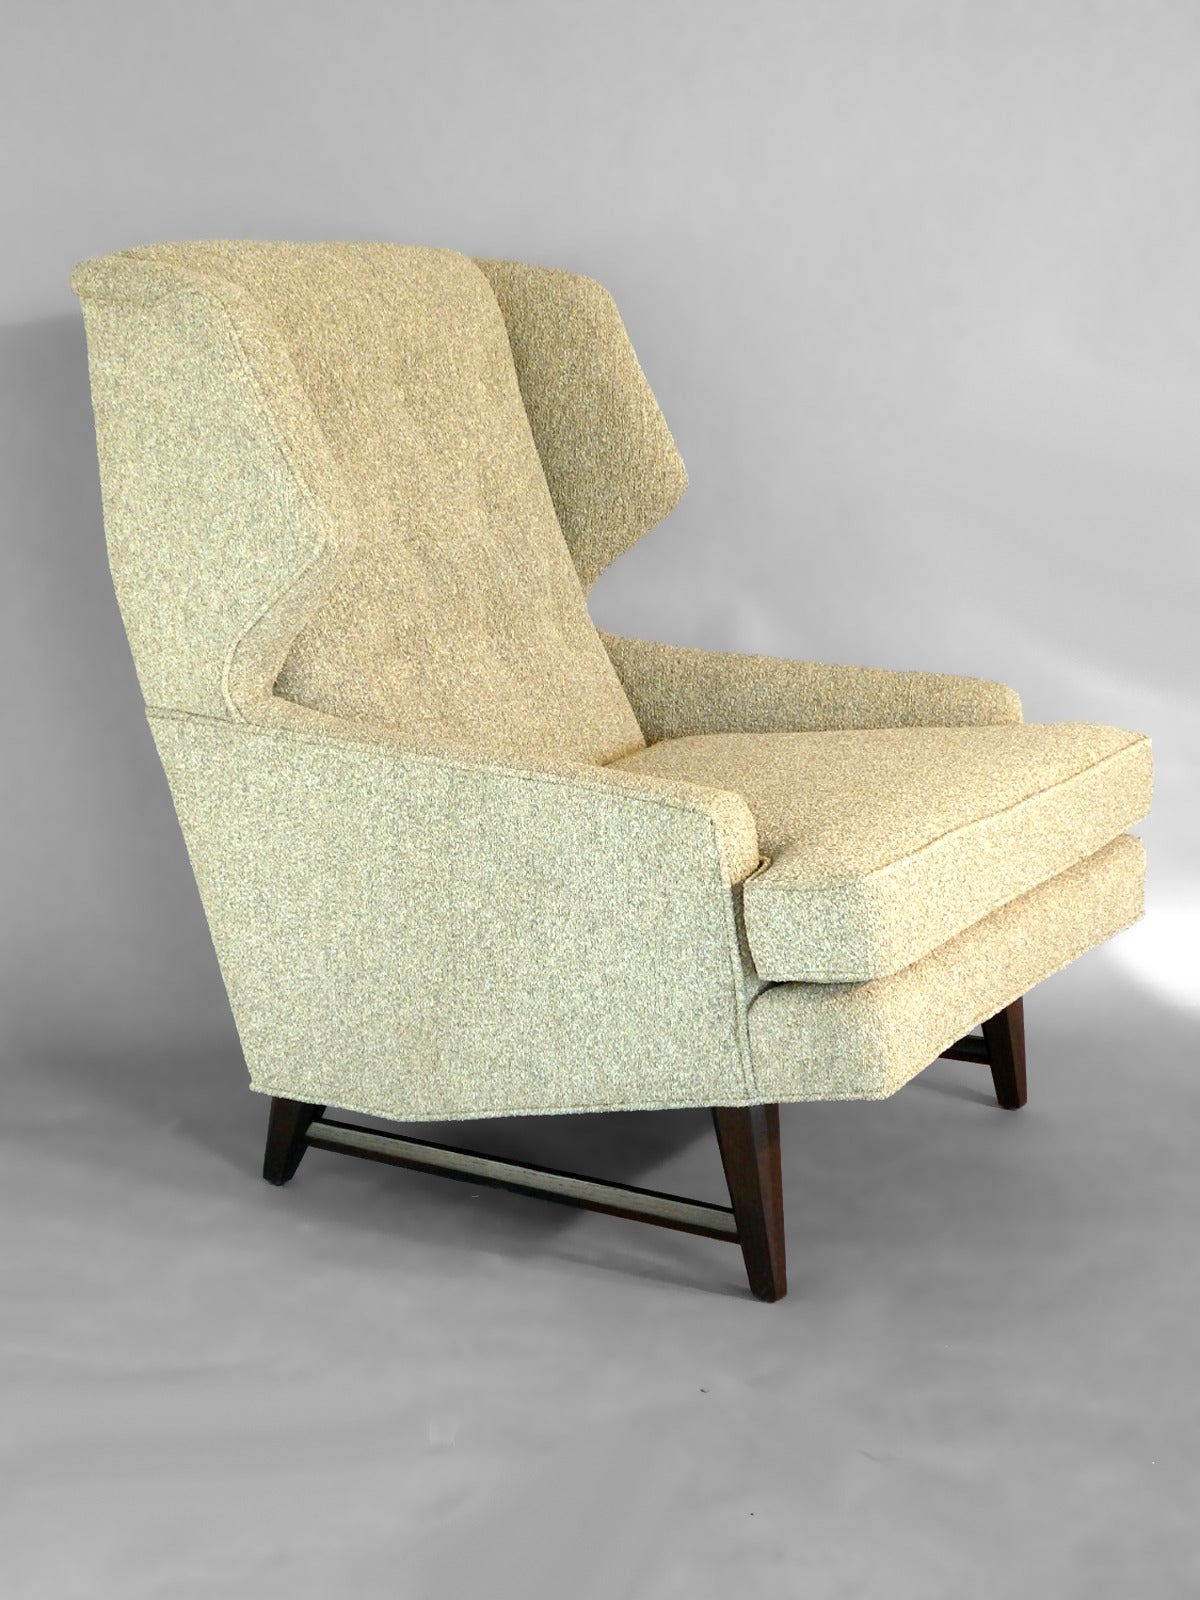 American Style of Edward Wormley Modernist Wing Chair